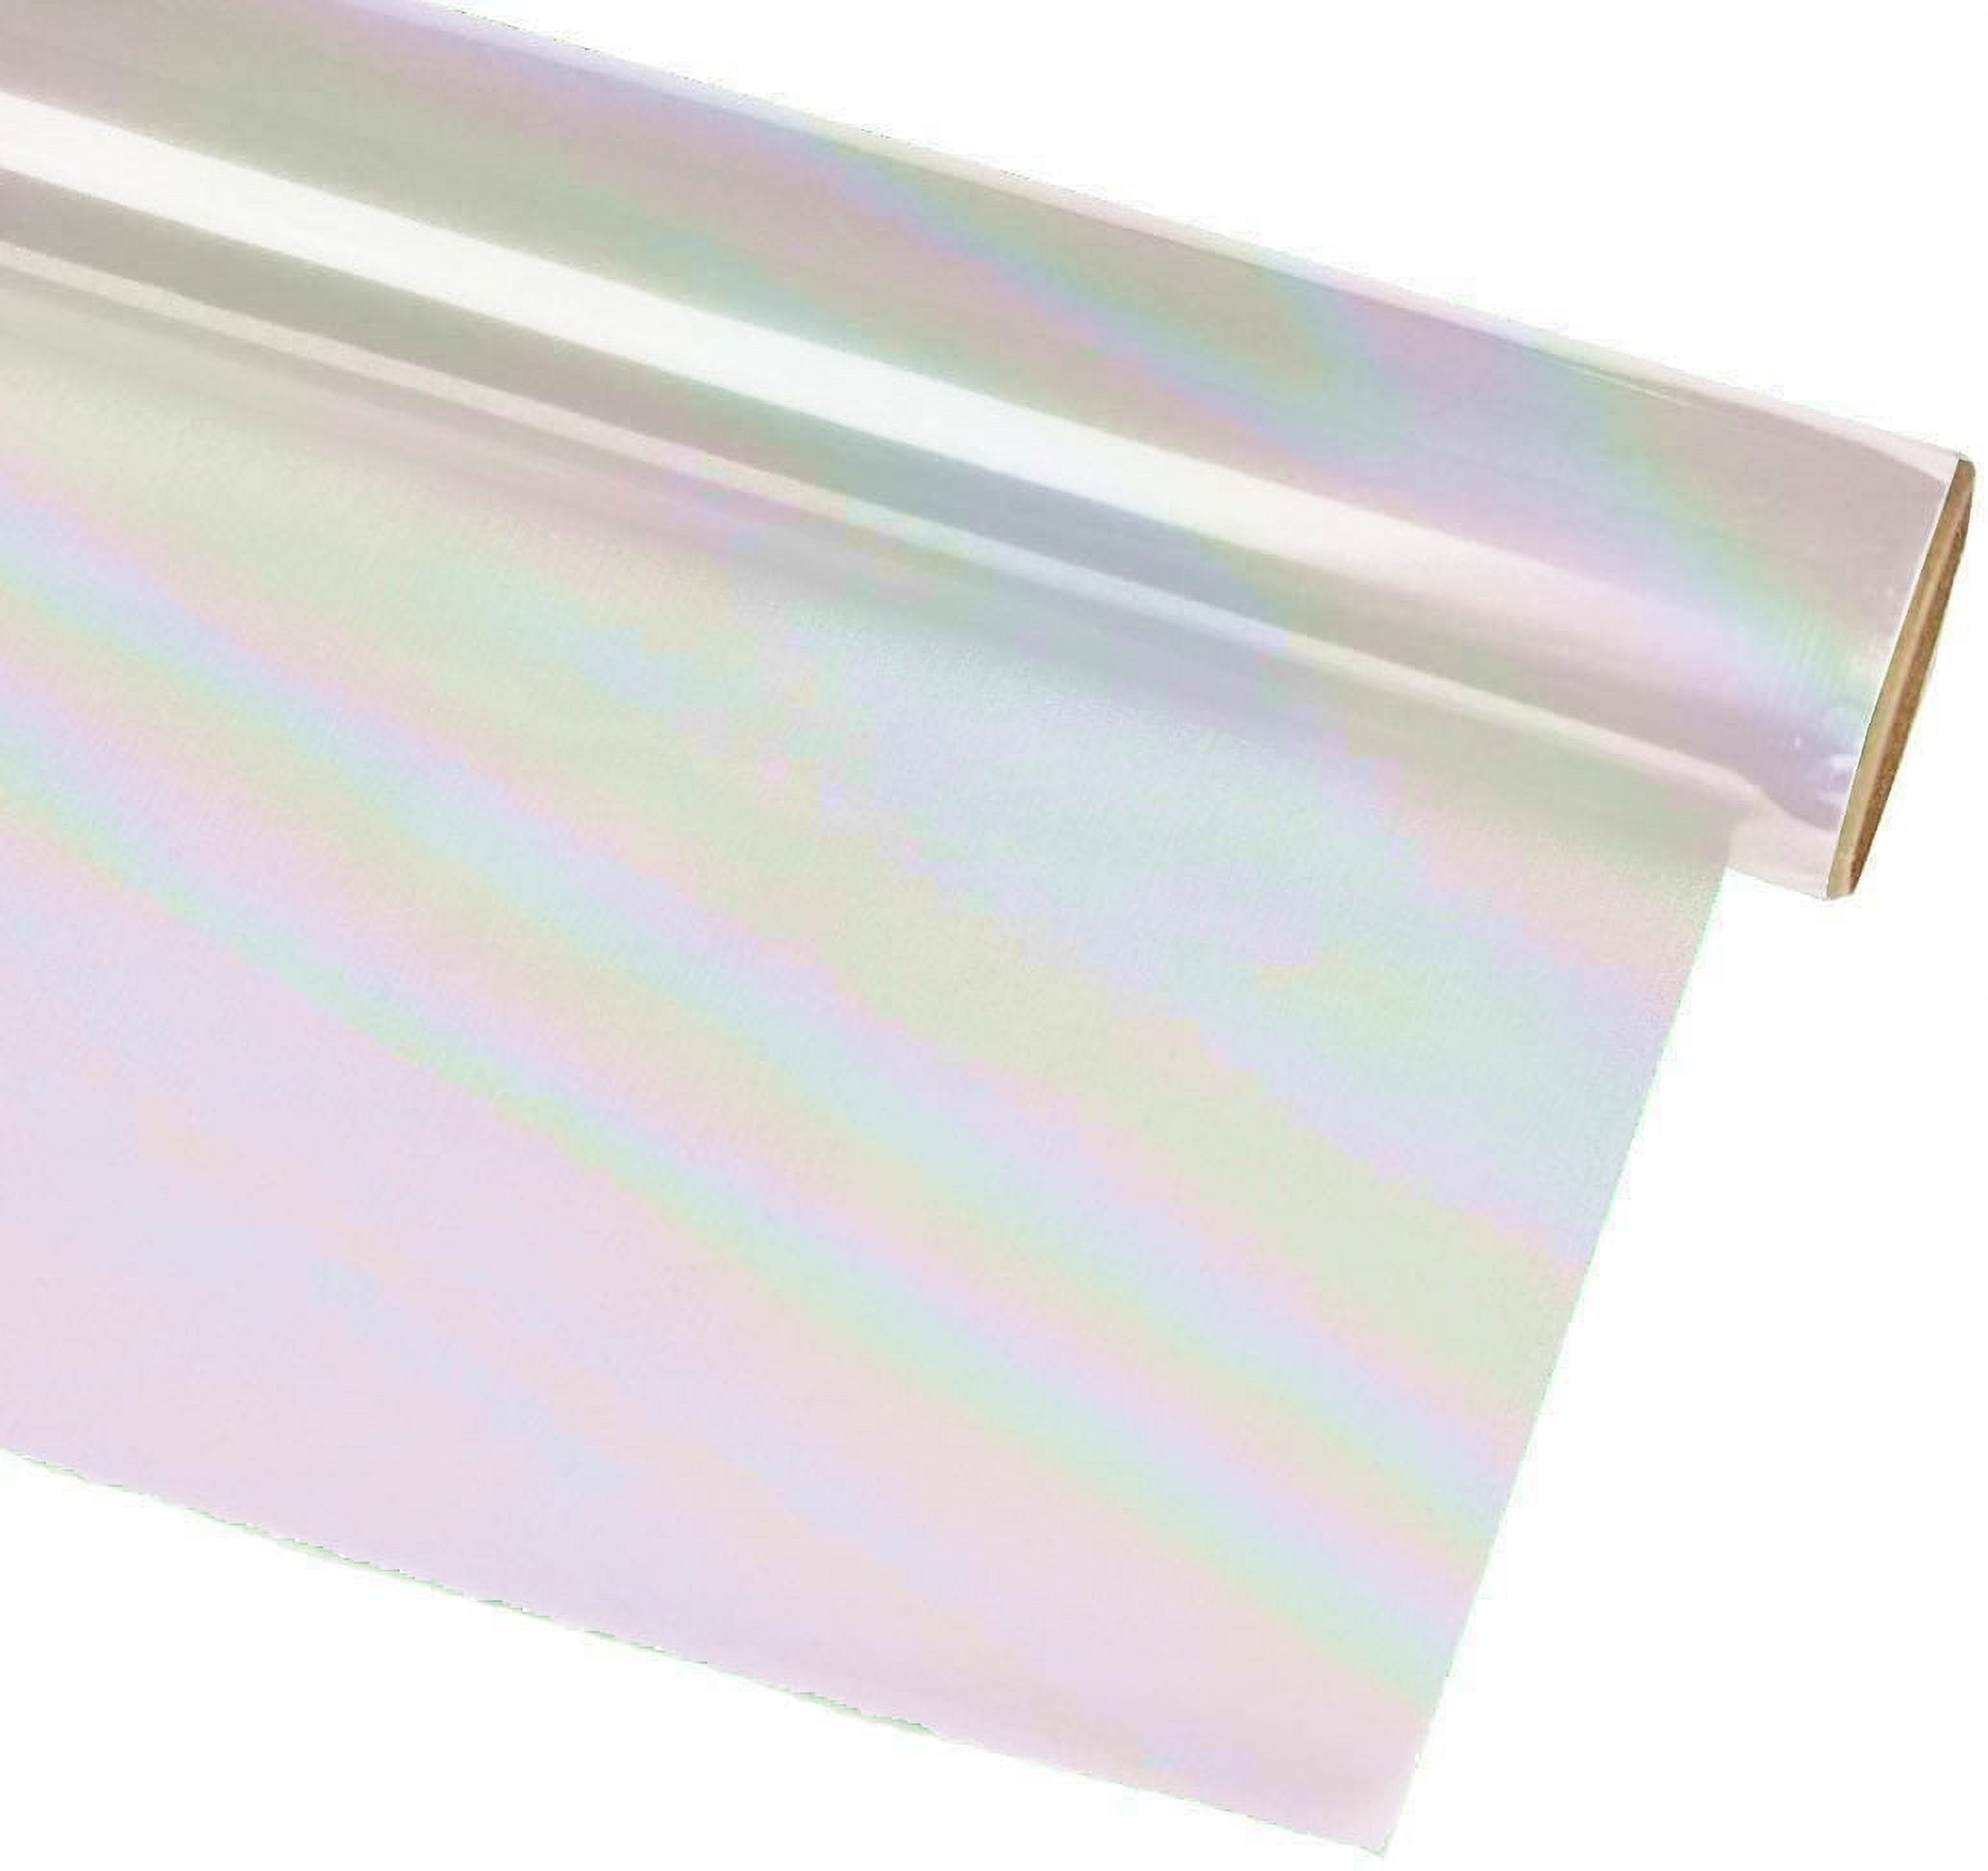 Iridescent Cellophane Gift Wrapping  Cellophane Iridescent Paper Roll -  Paper - Aliexpress